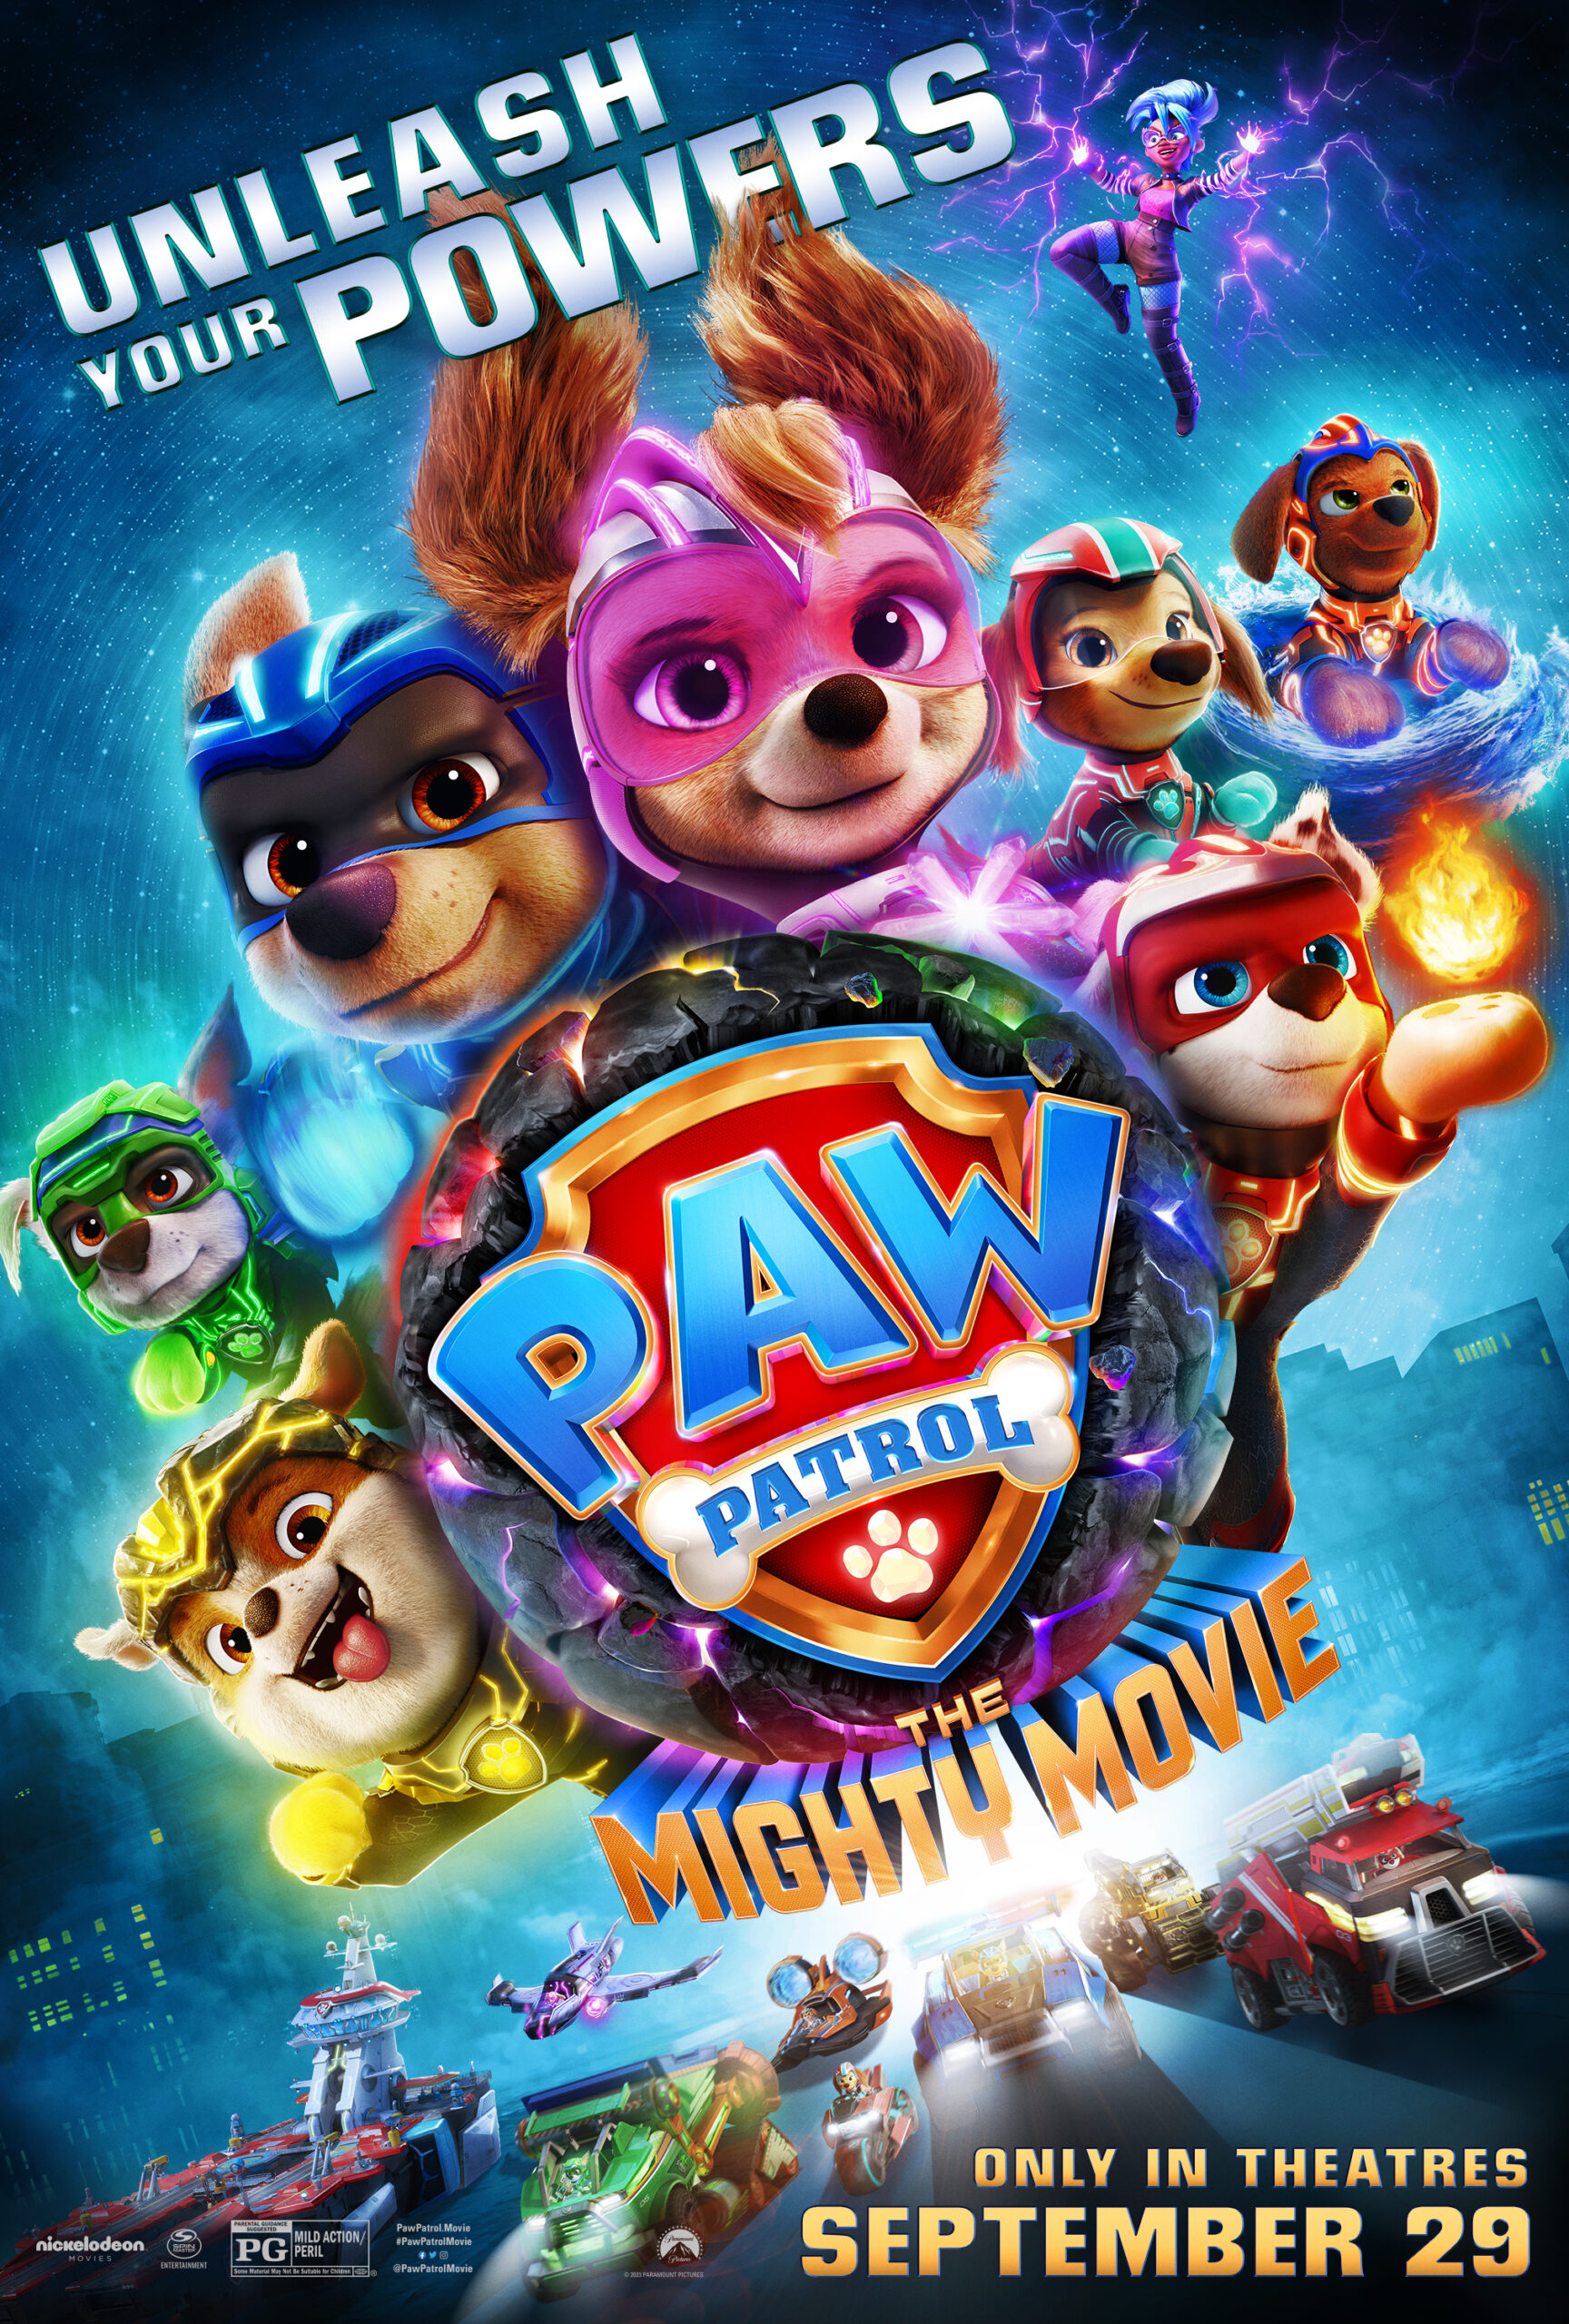 ‘PAW Patrol: The Mighty Movie’ Soars Into Homes For An Action-Packed Family Adventure